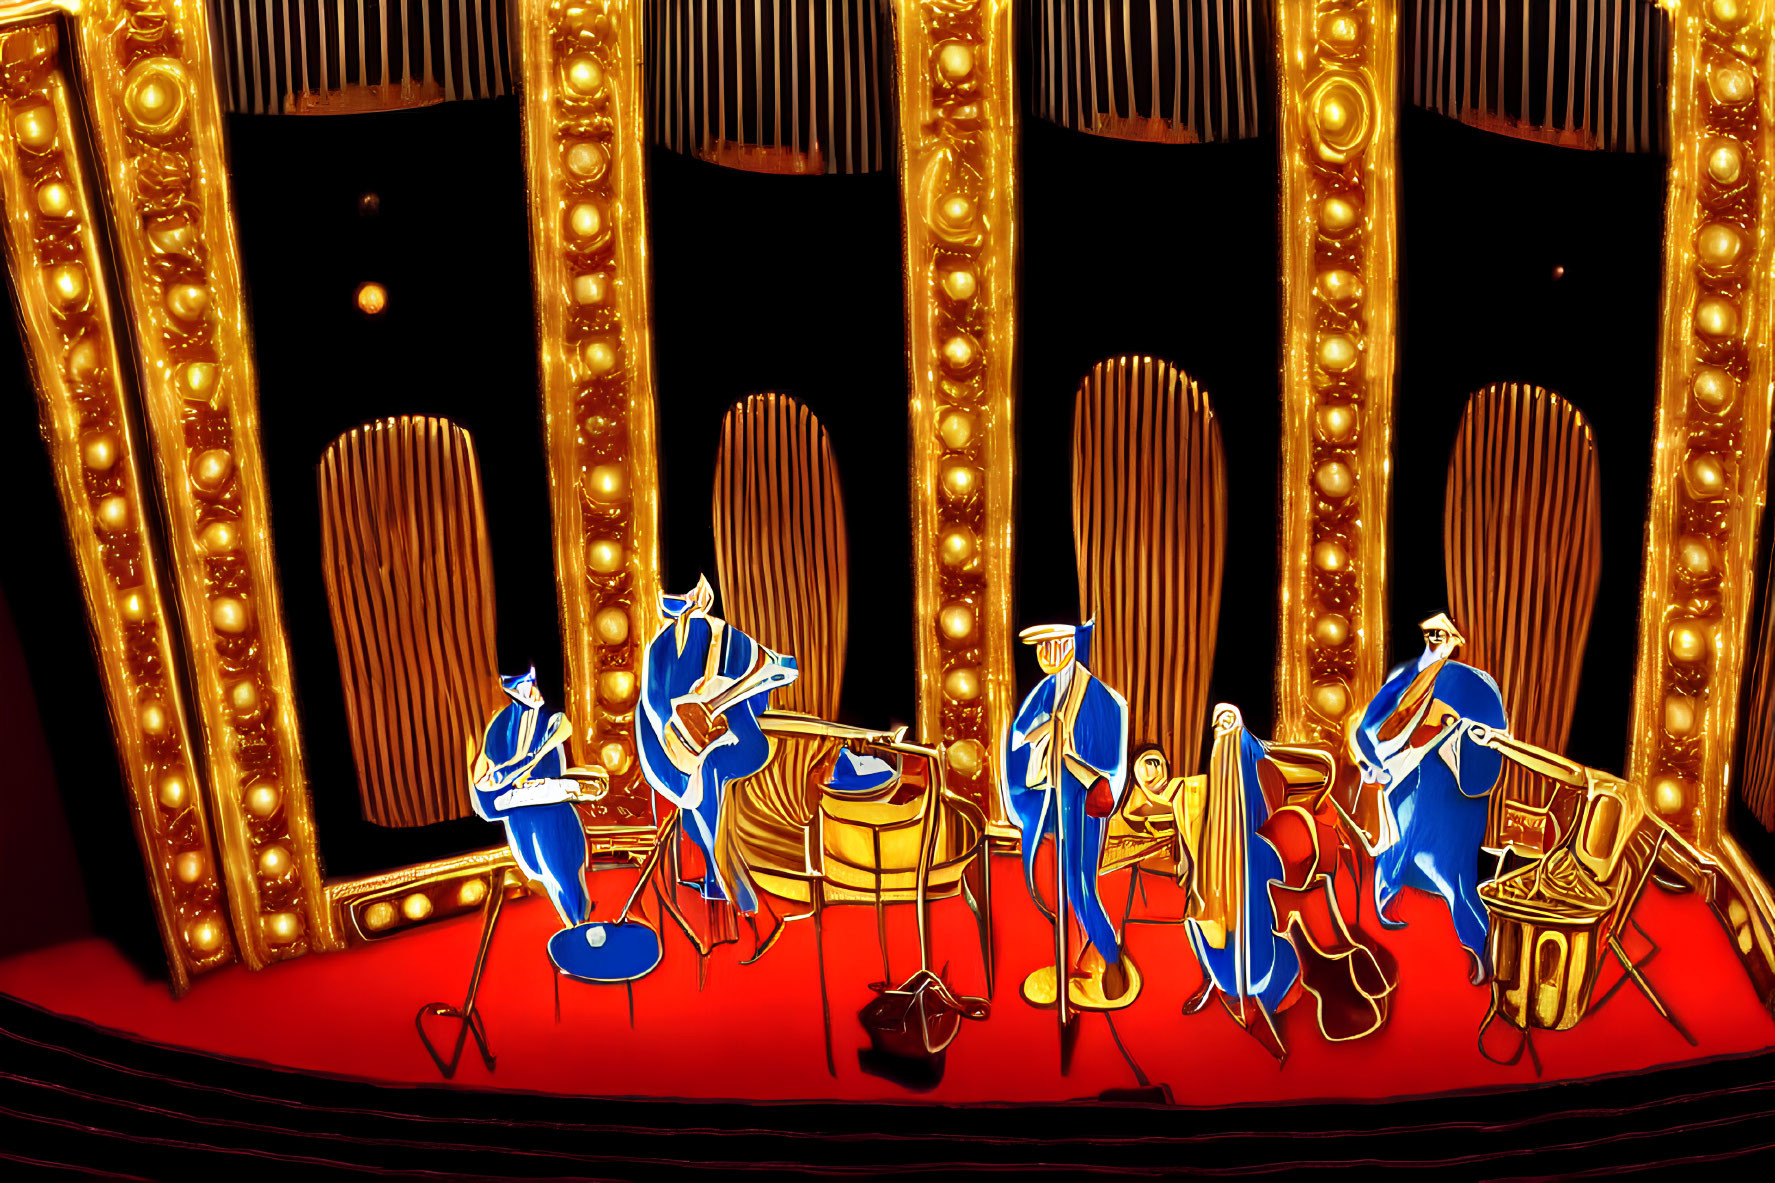 Animated jazz band performance on glamorous stage with golden curtains and lights.